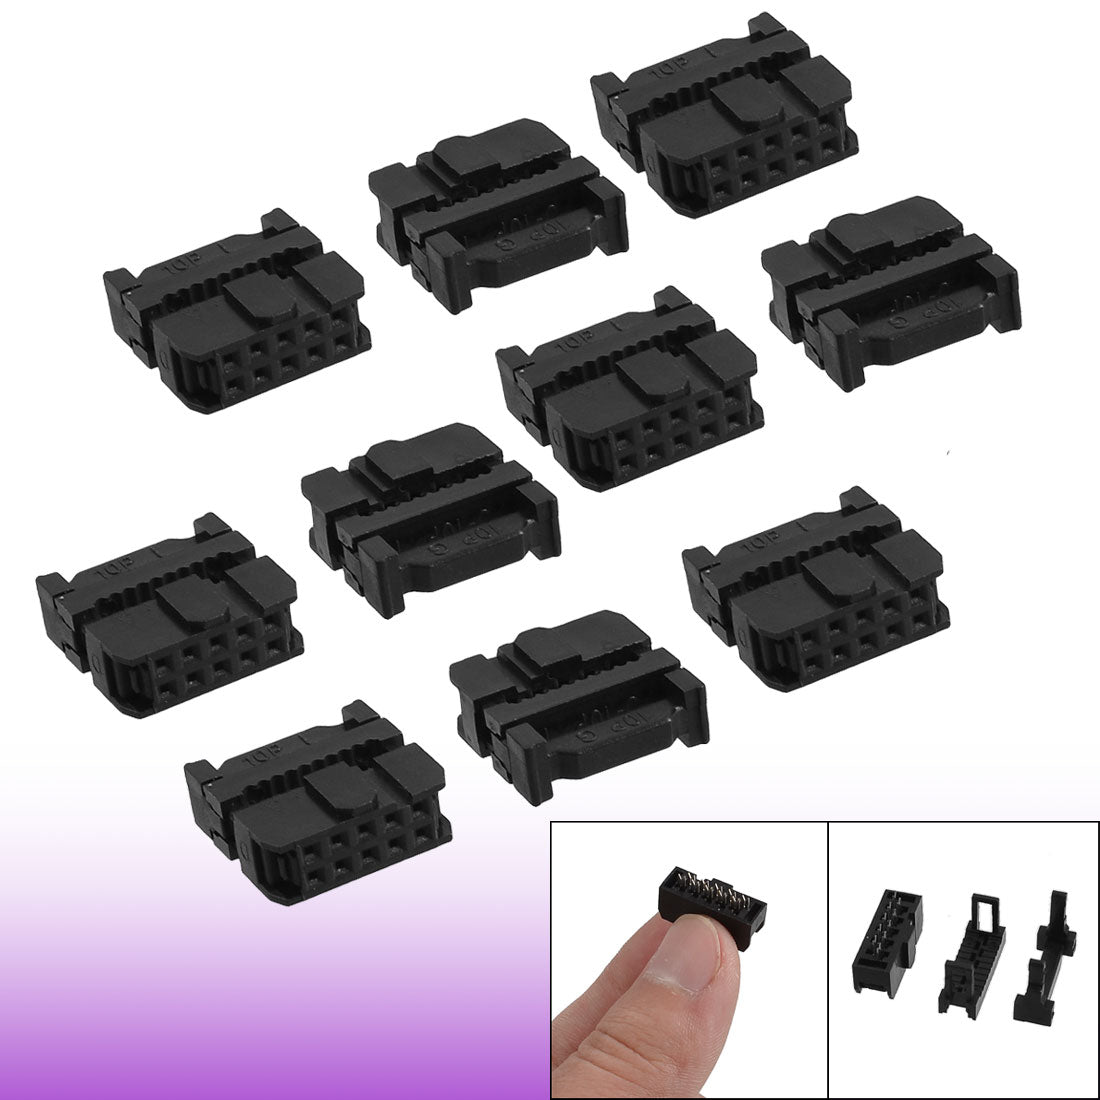 uxcell Uxcell 10 Pcs 10 Position Female IDC Socket Flat Ribbon Cable Connectors FC-10P